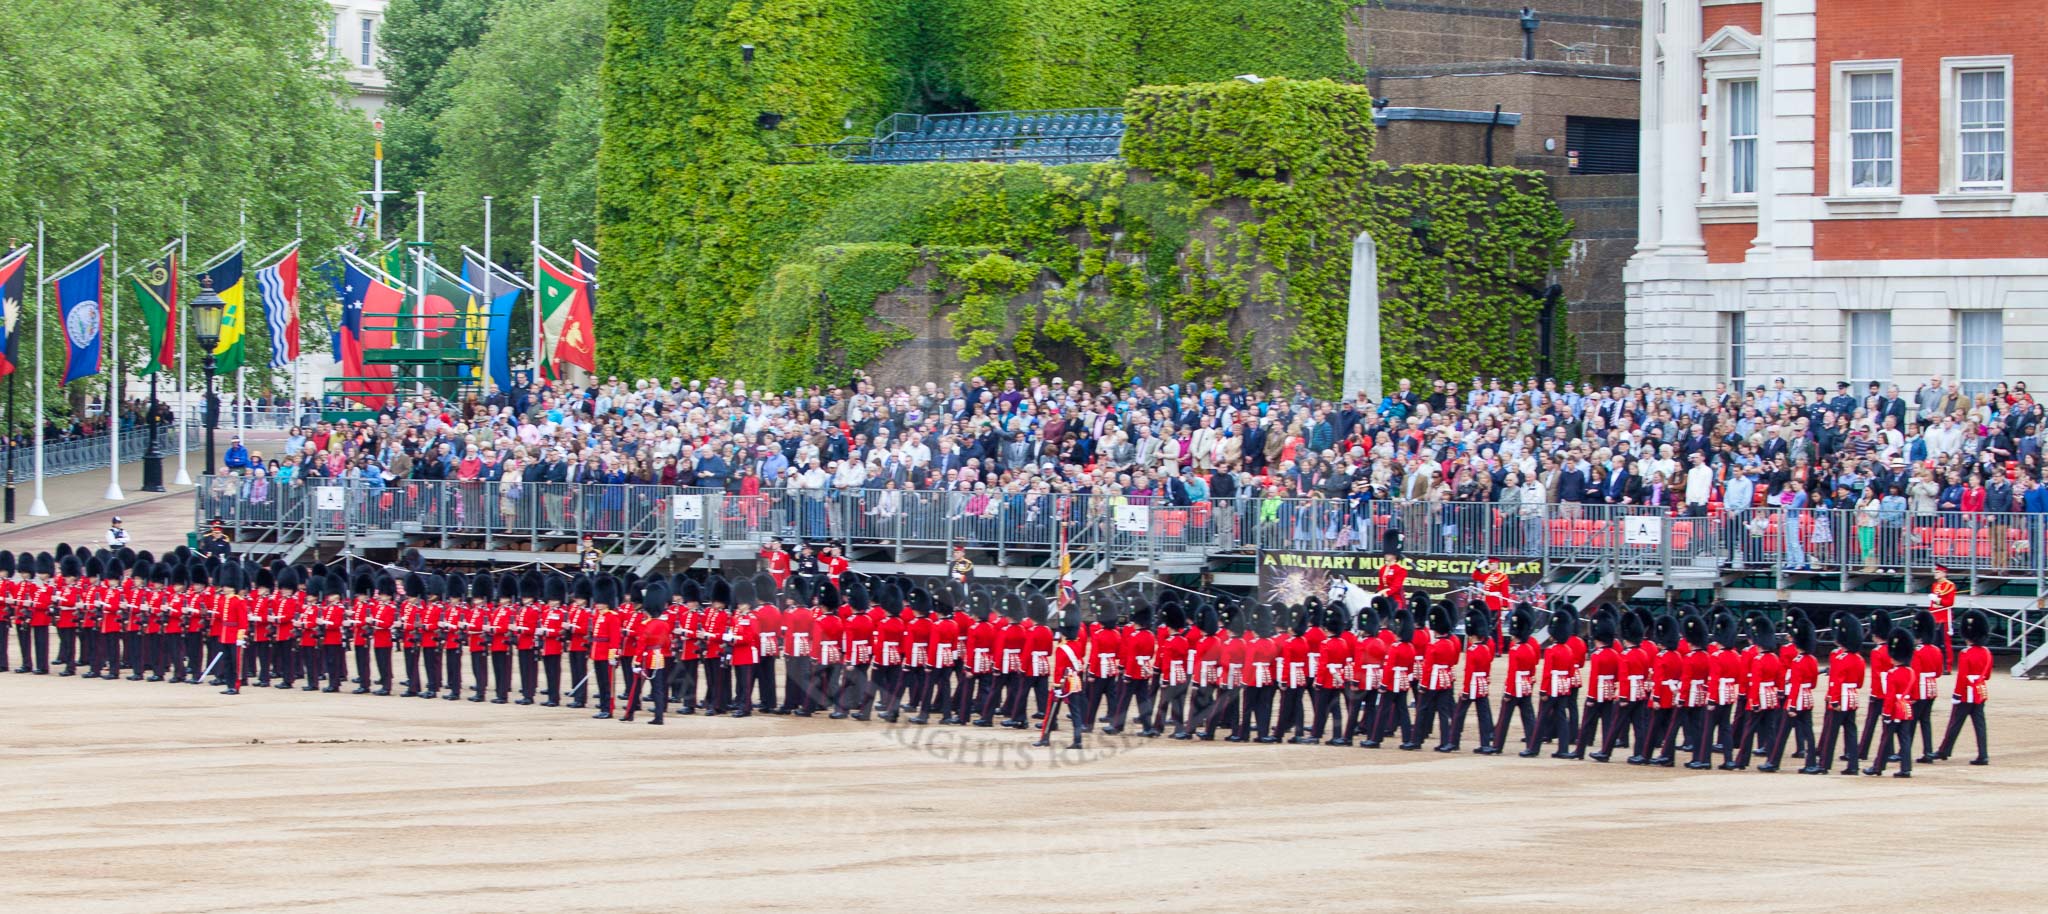 Major General's Review 2013: The Escort Tto the Colour is marching towards No.6 and No.7 Guard..
Horse Guards Parade, Westminster,
London SW1,

United Kingdom,
on 01 June 2013 at 11:23, image #420